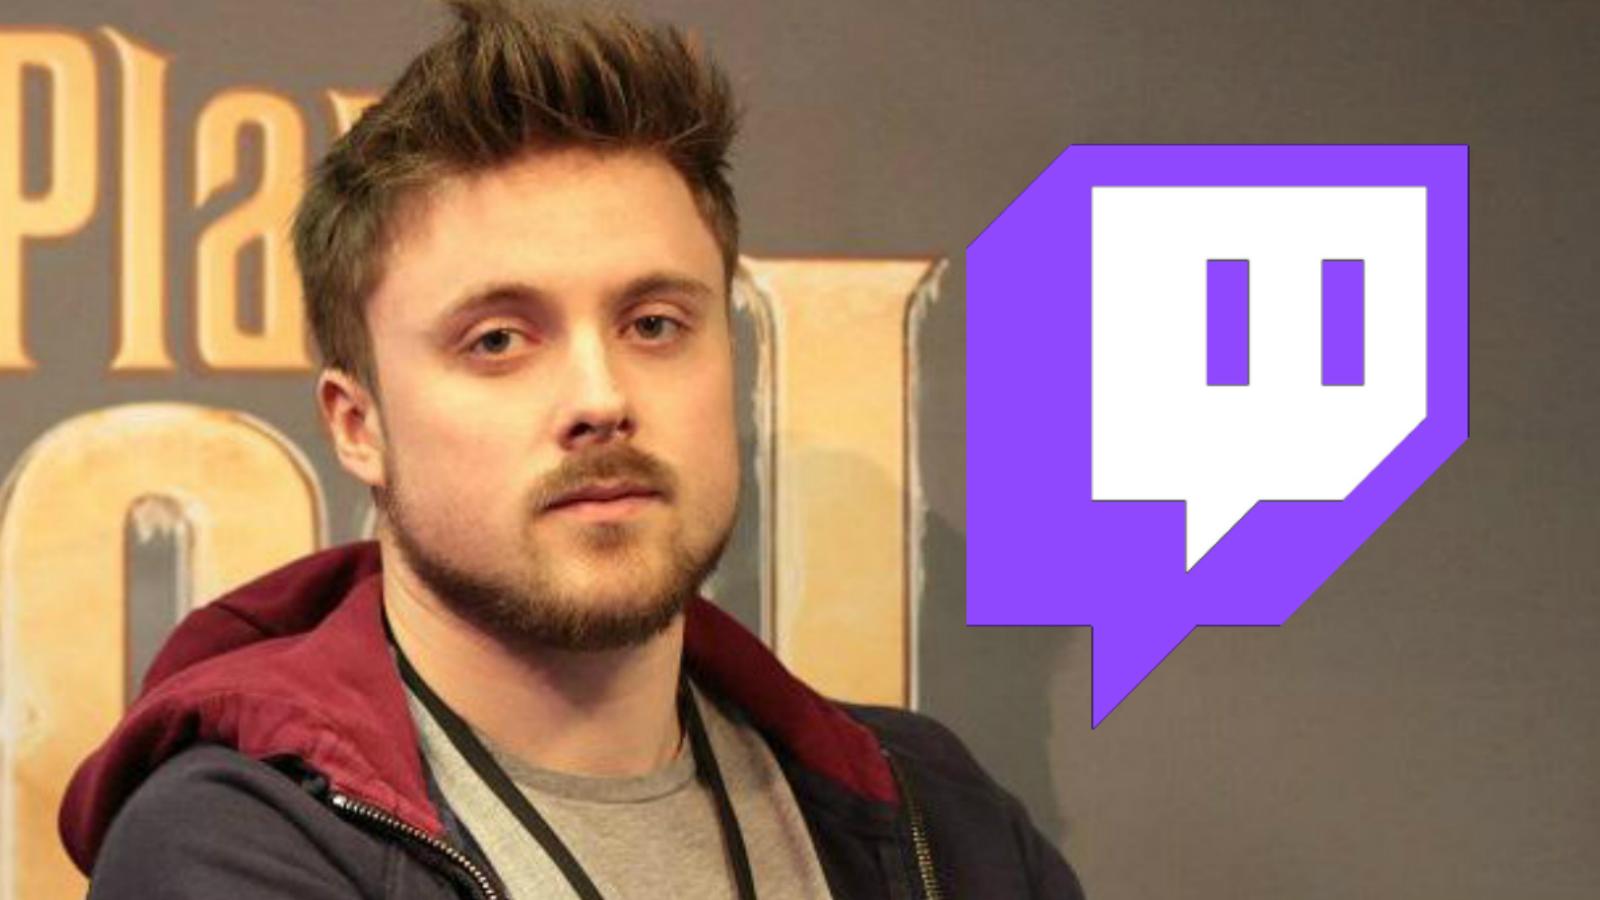 Forsen banned on Twitch because of misheard slur